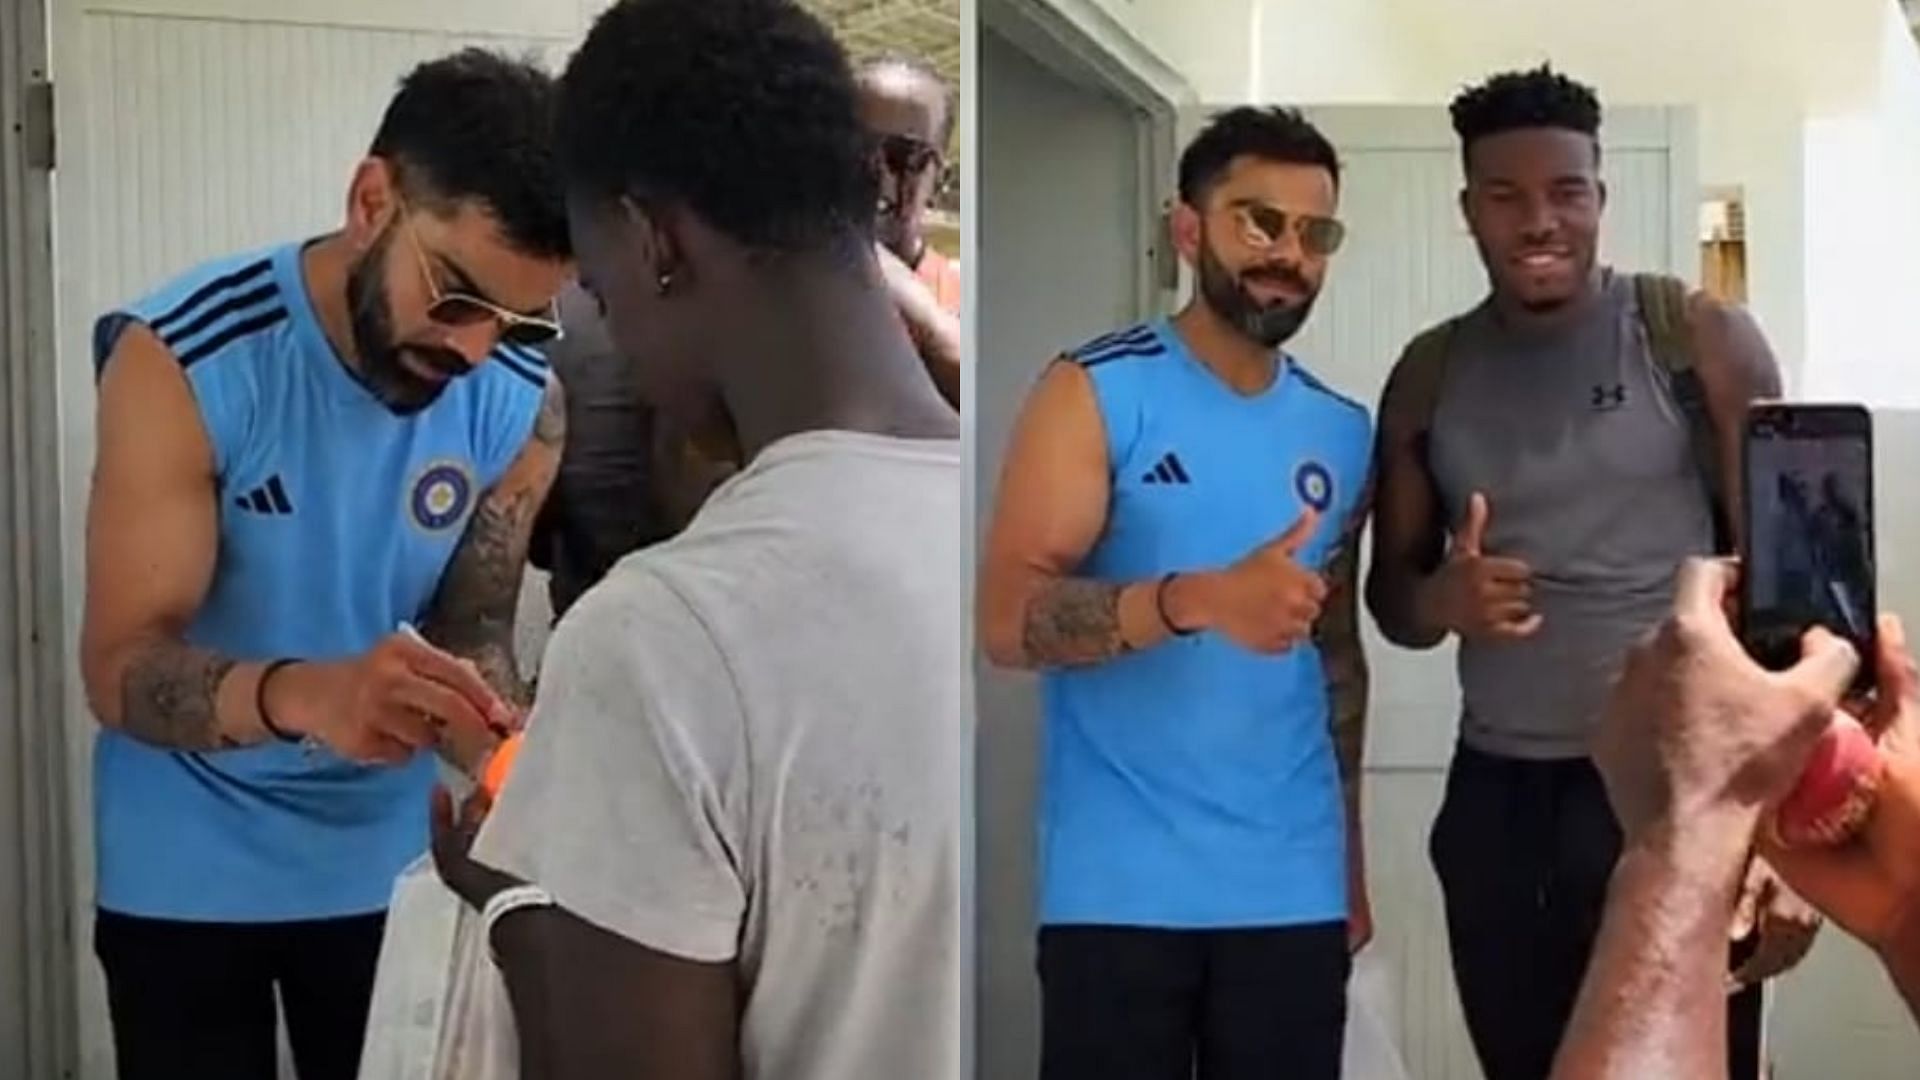 Snippets from the video posted by BCCI on Twitter